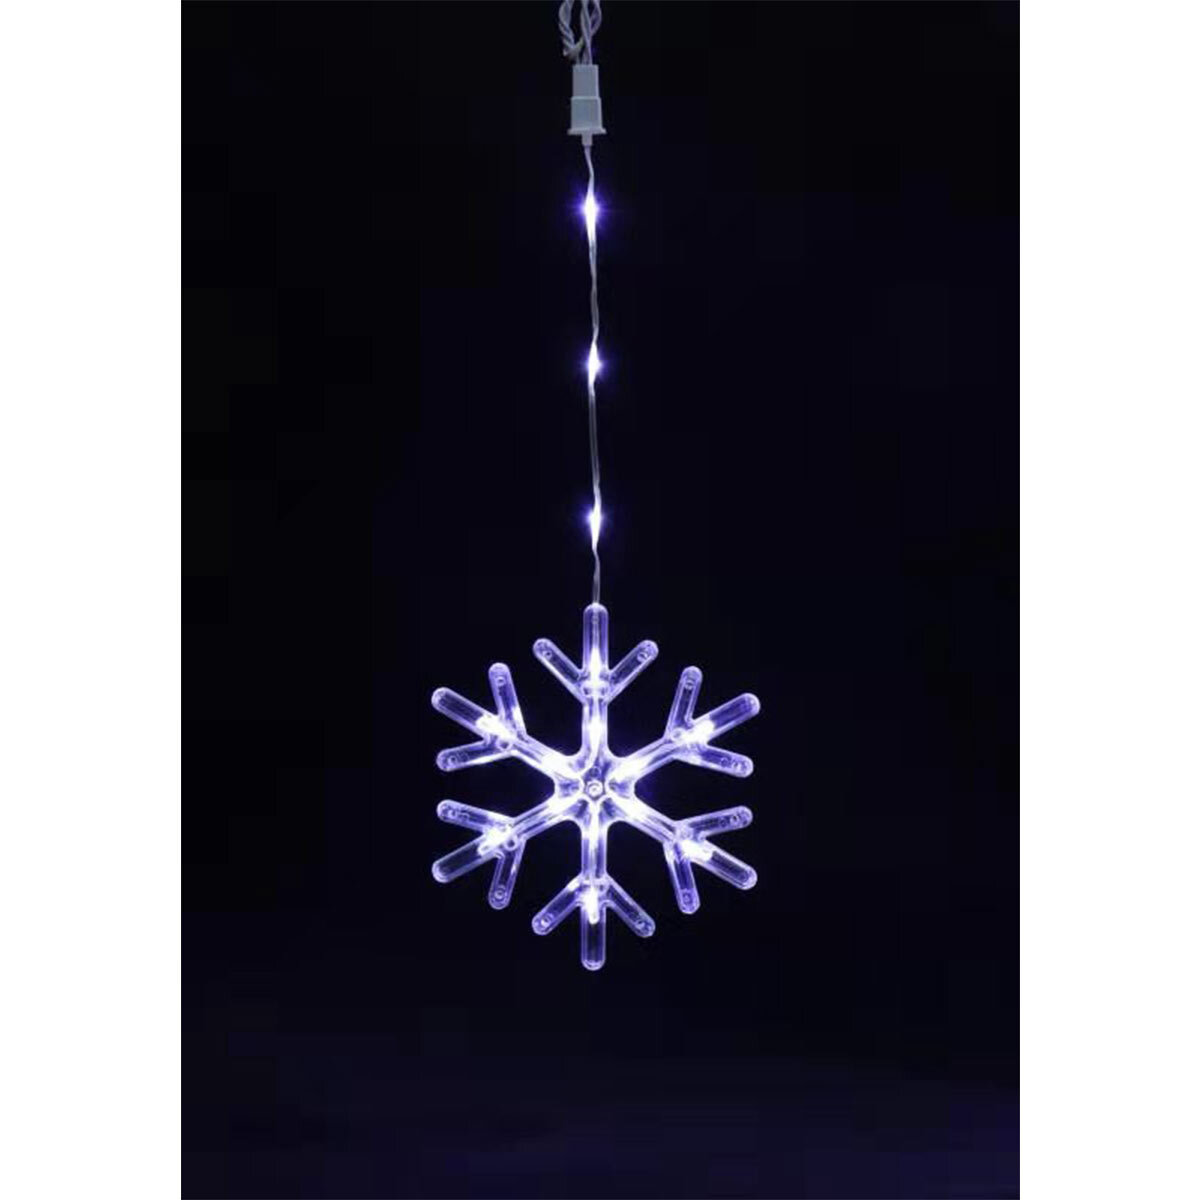 Buy 18ft Snowflake LED String Lights Feature2 Image at Costco.co.uk